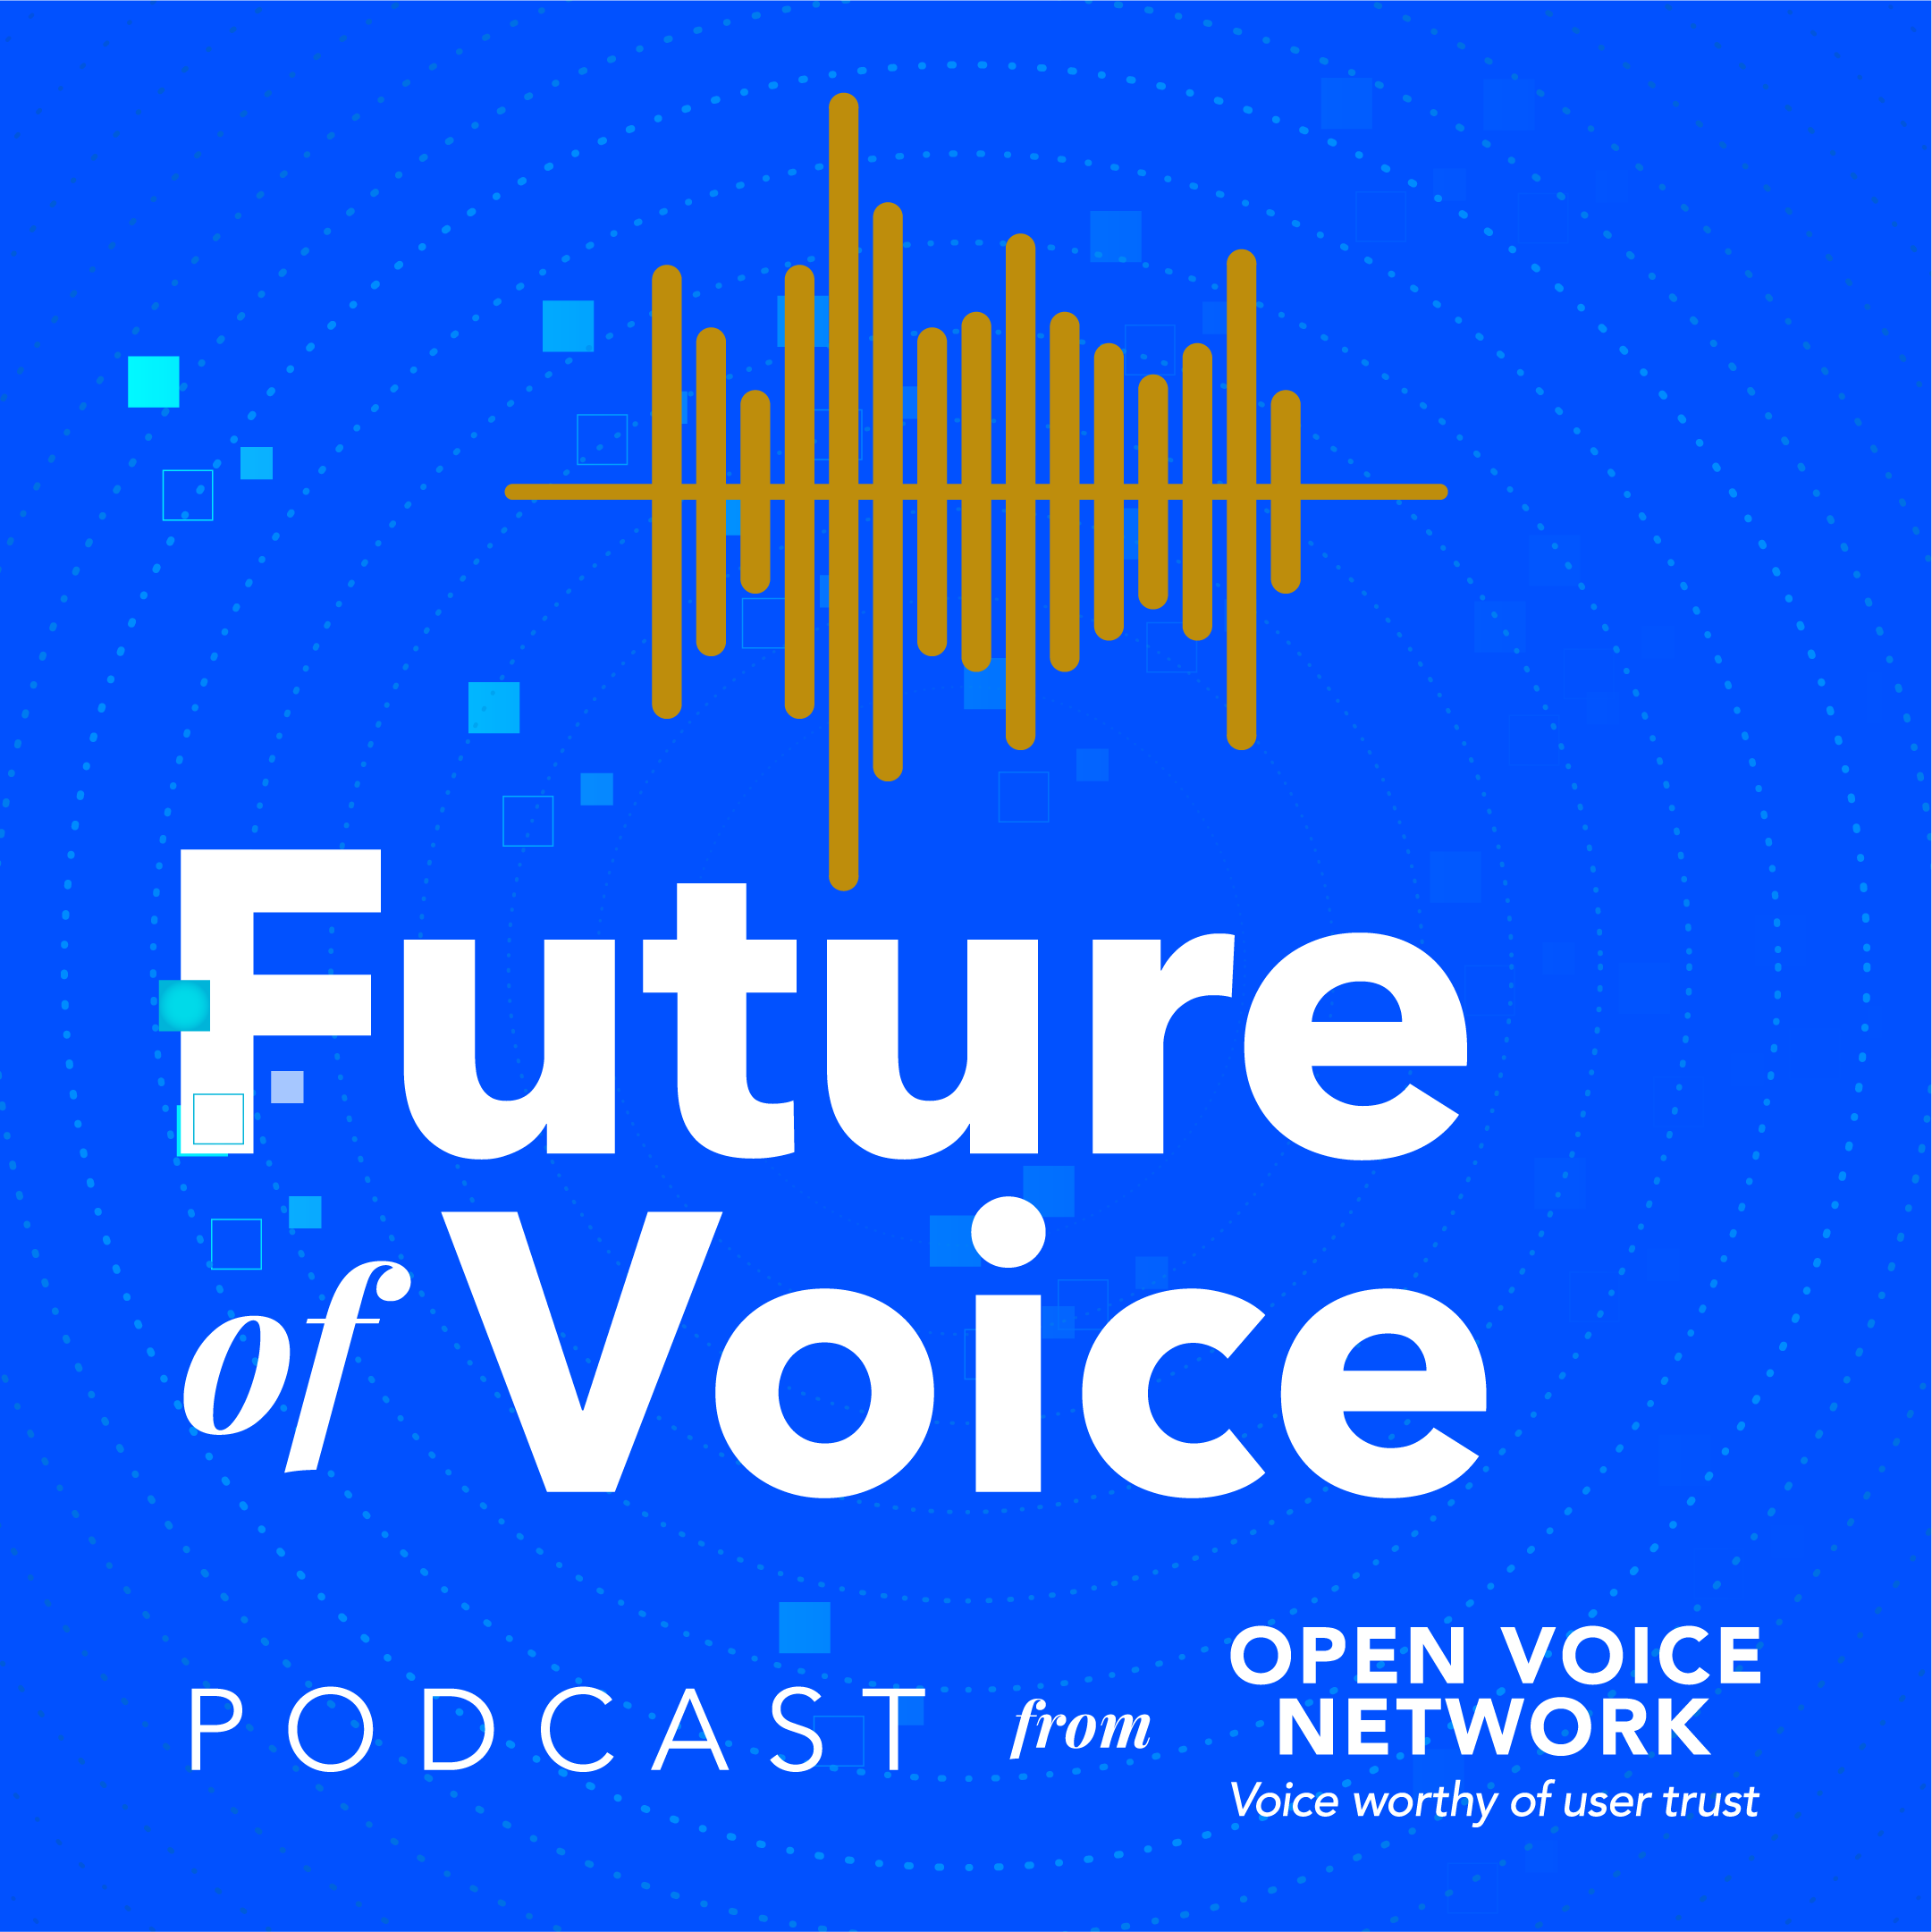 Introducing the Future of Voice Podcast